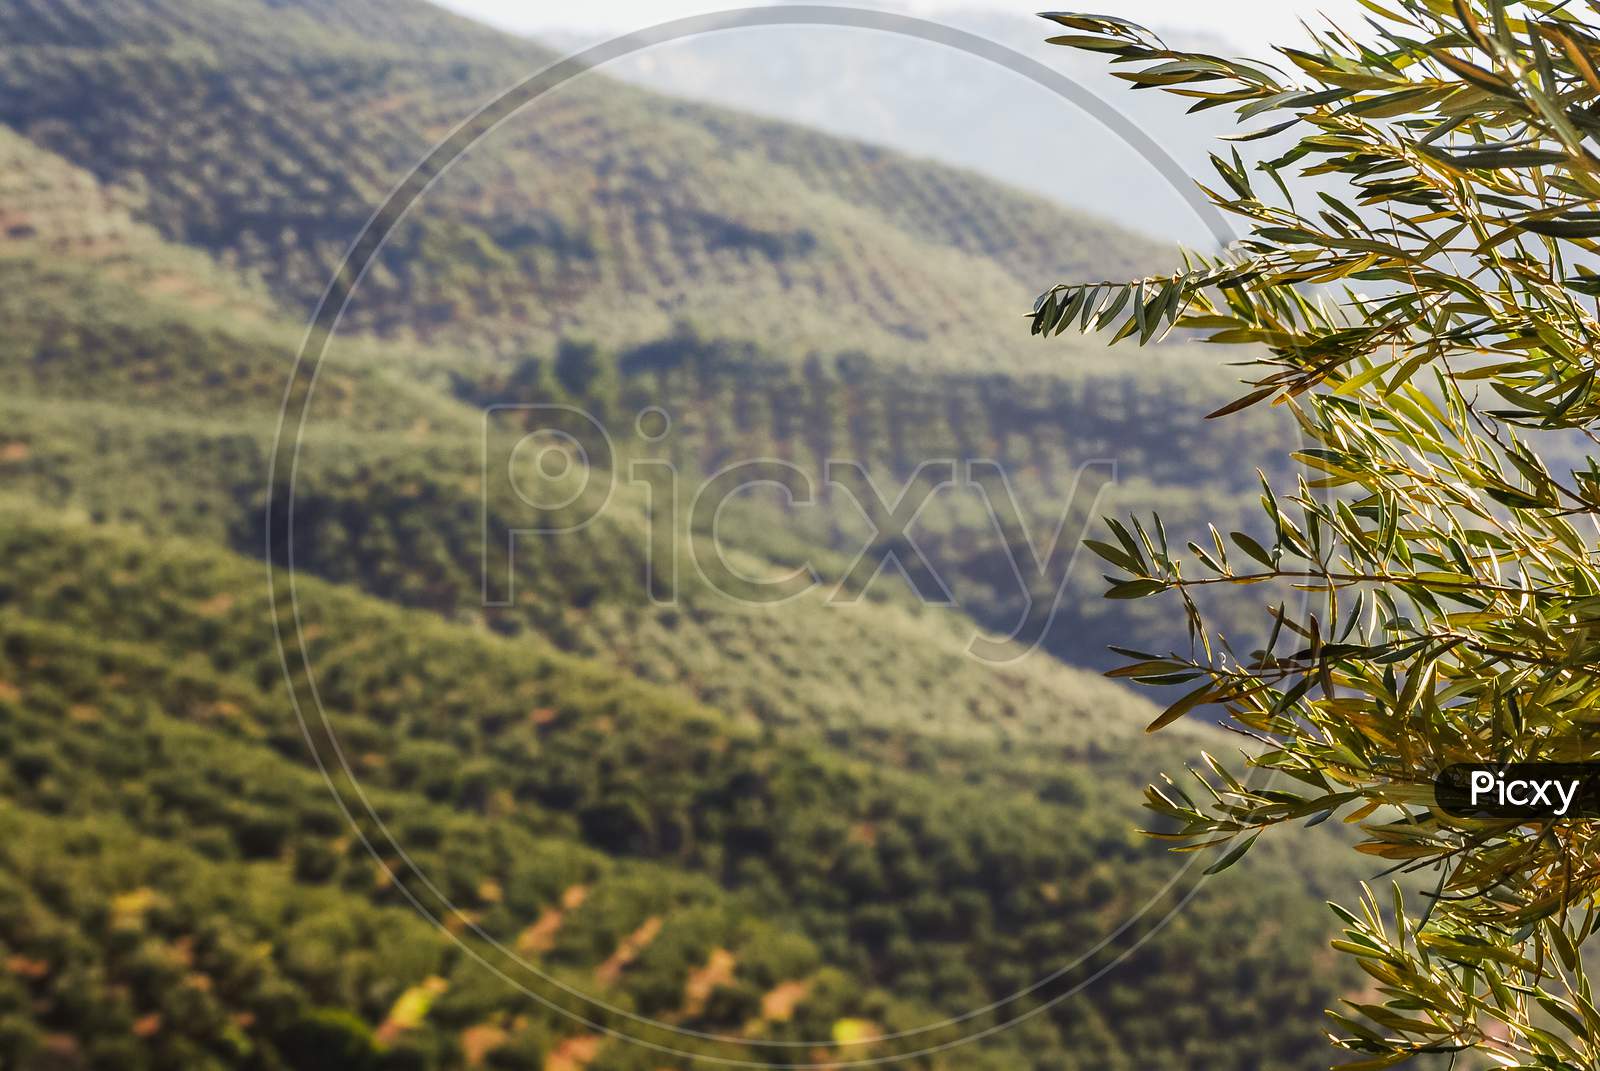 An Image Of Olive Grove And Some Branches And Leaves In The Closeup